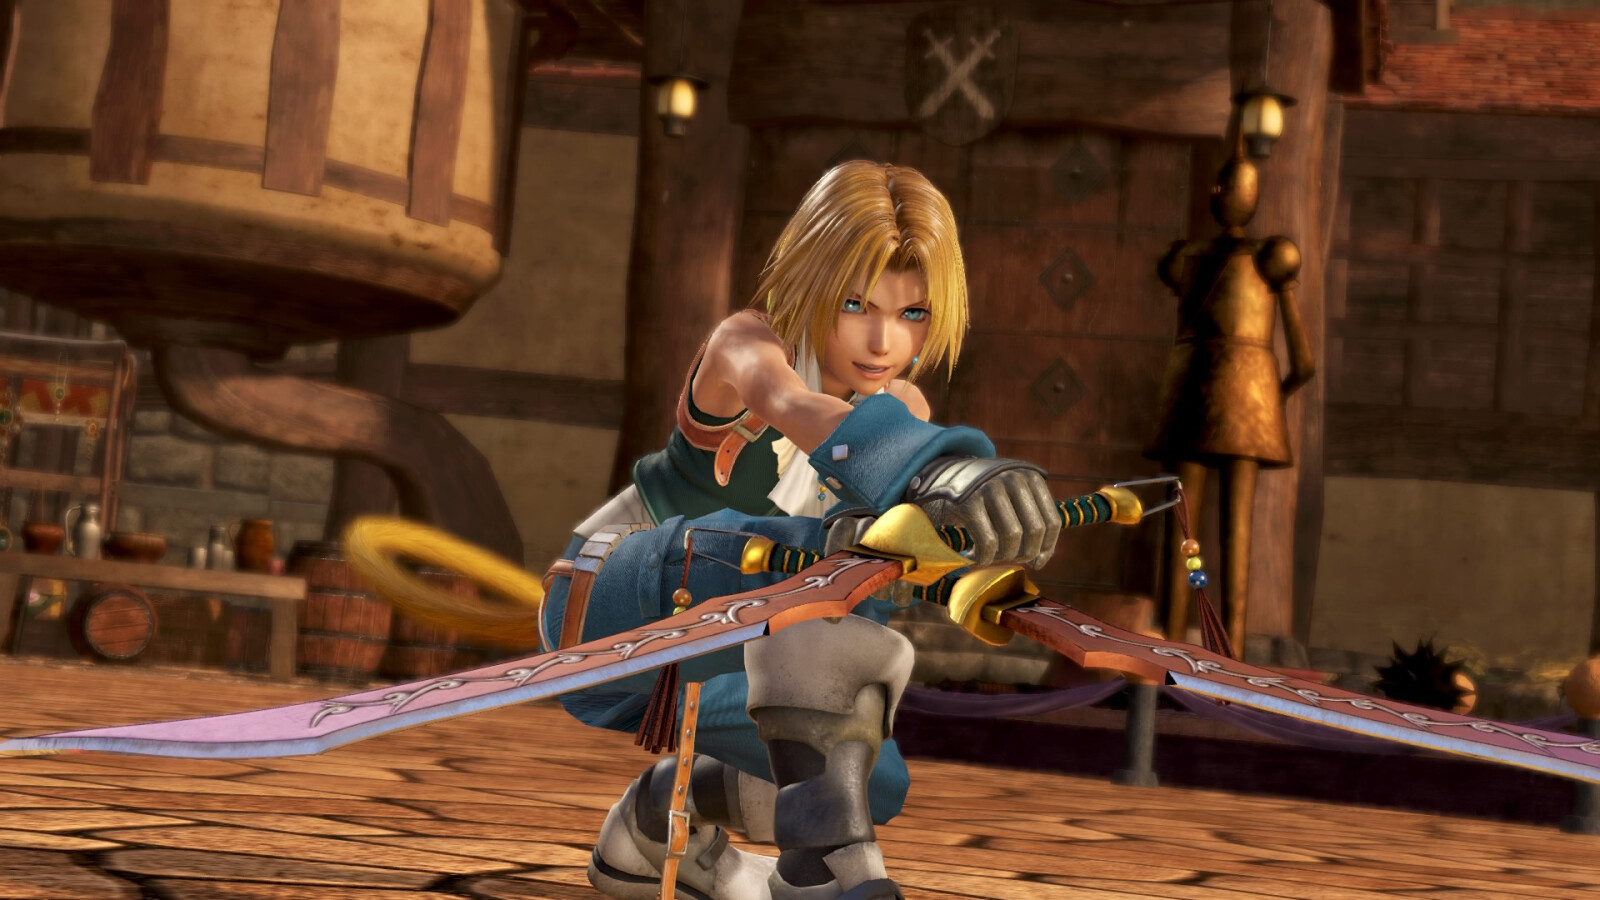 Zidane Tribal from FFIX in Dissidia, an ff-based fighting game